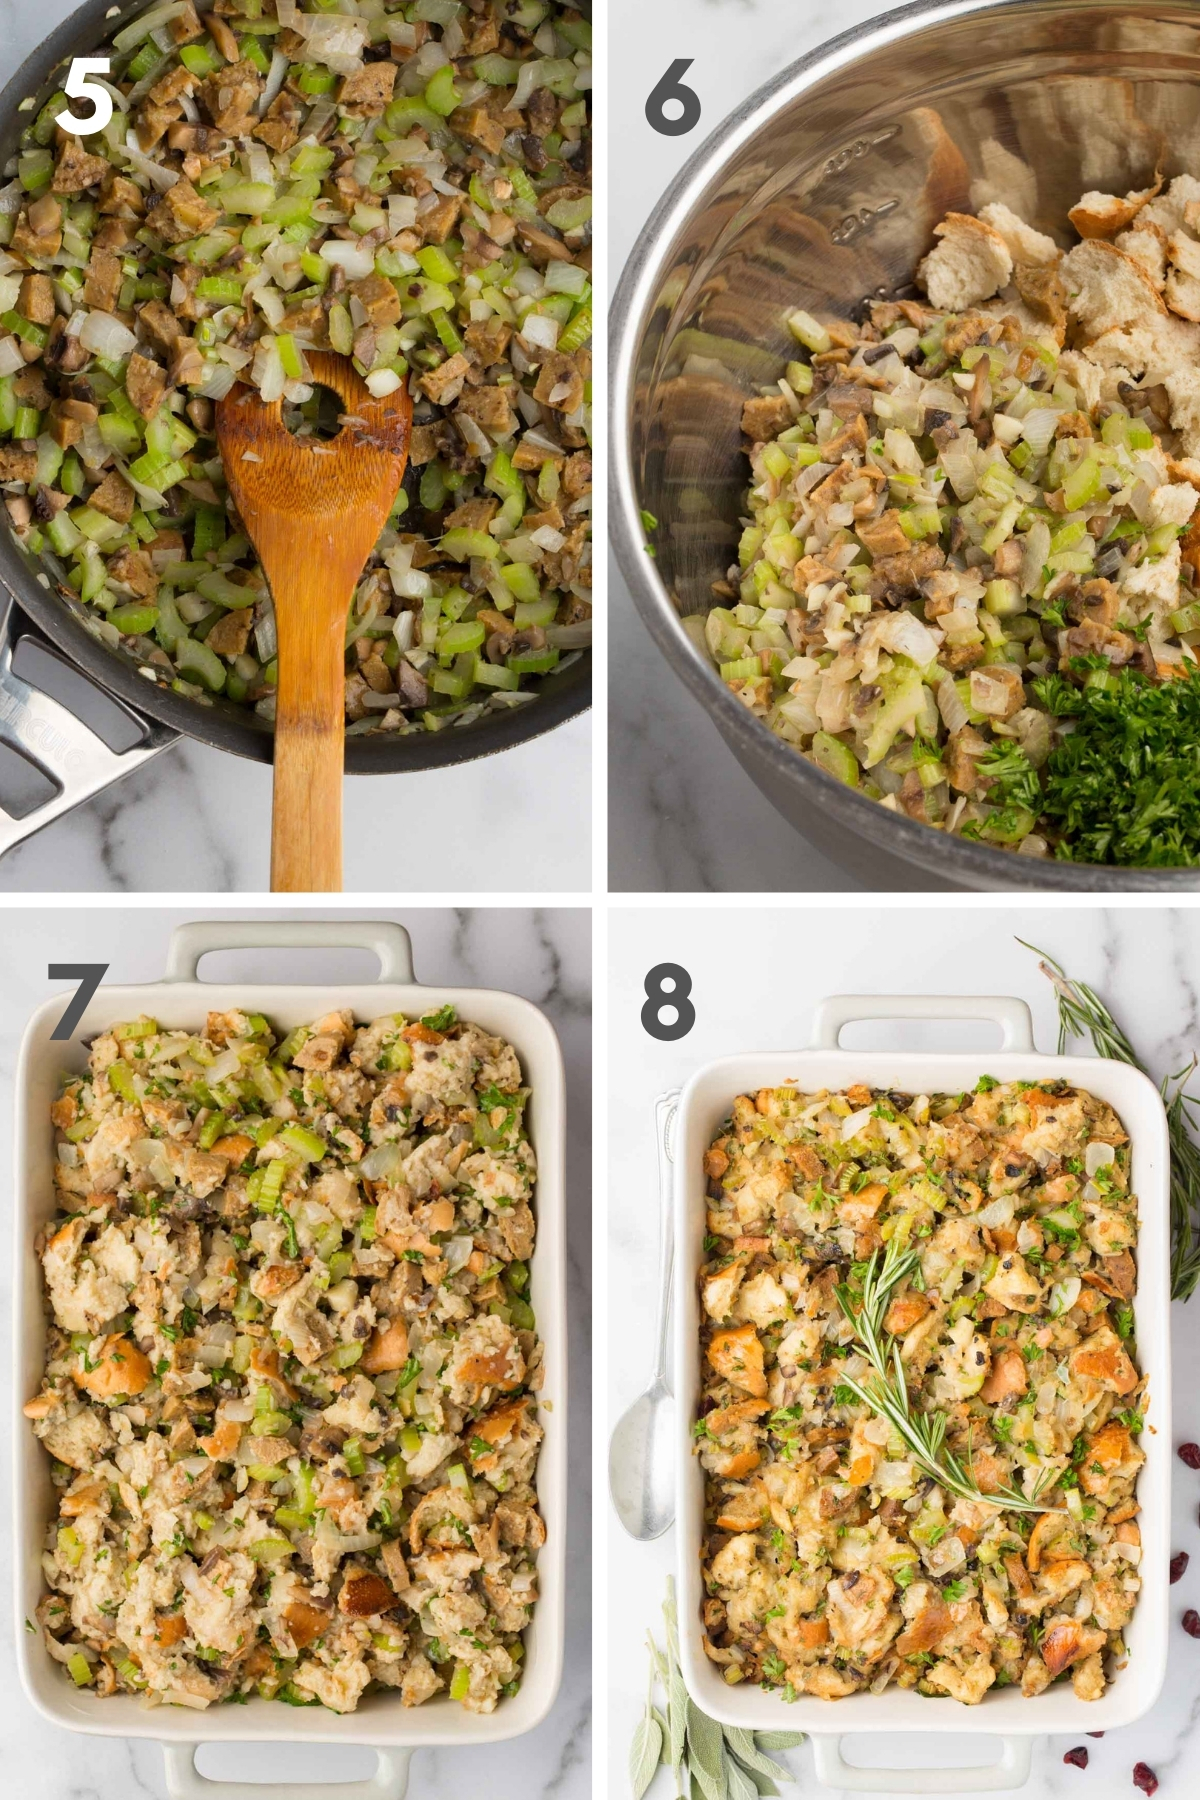 steps 5-8 of making vegan stuffing: sautéed veggies in skillet, sautéed veggies and toasted bread in metal mixing bowl with fresh parsley, uncooked stuffing in white and gray baking dish, and finished cooked stuffing in white and gray baking dish with white marble background.